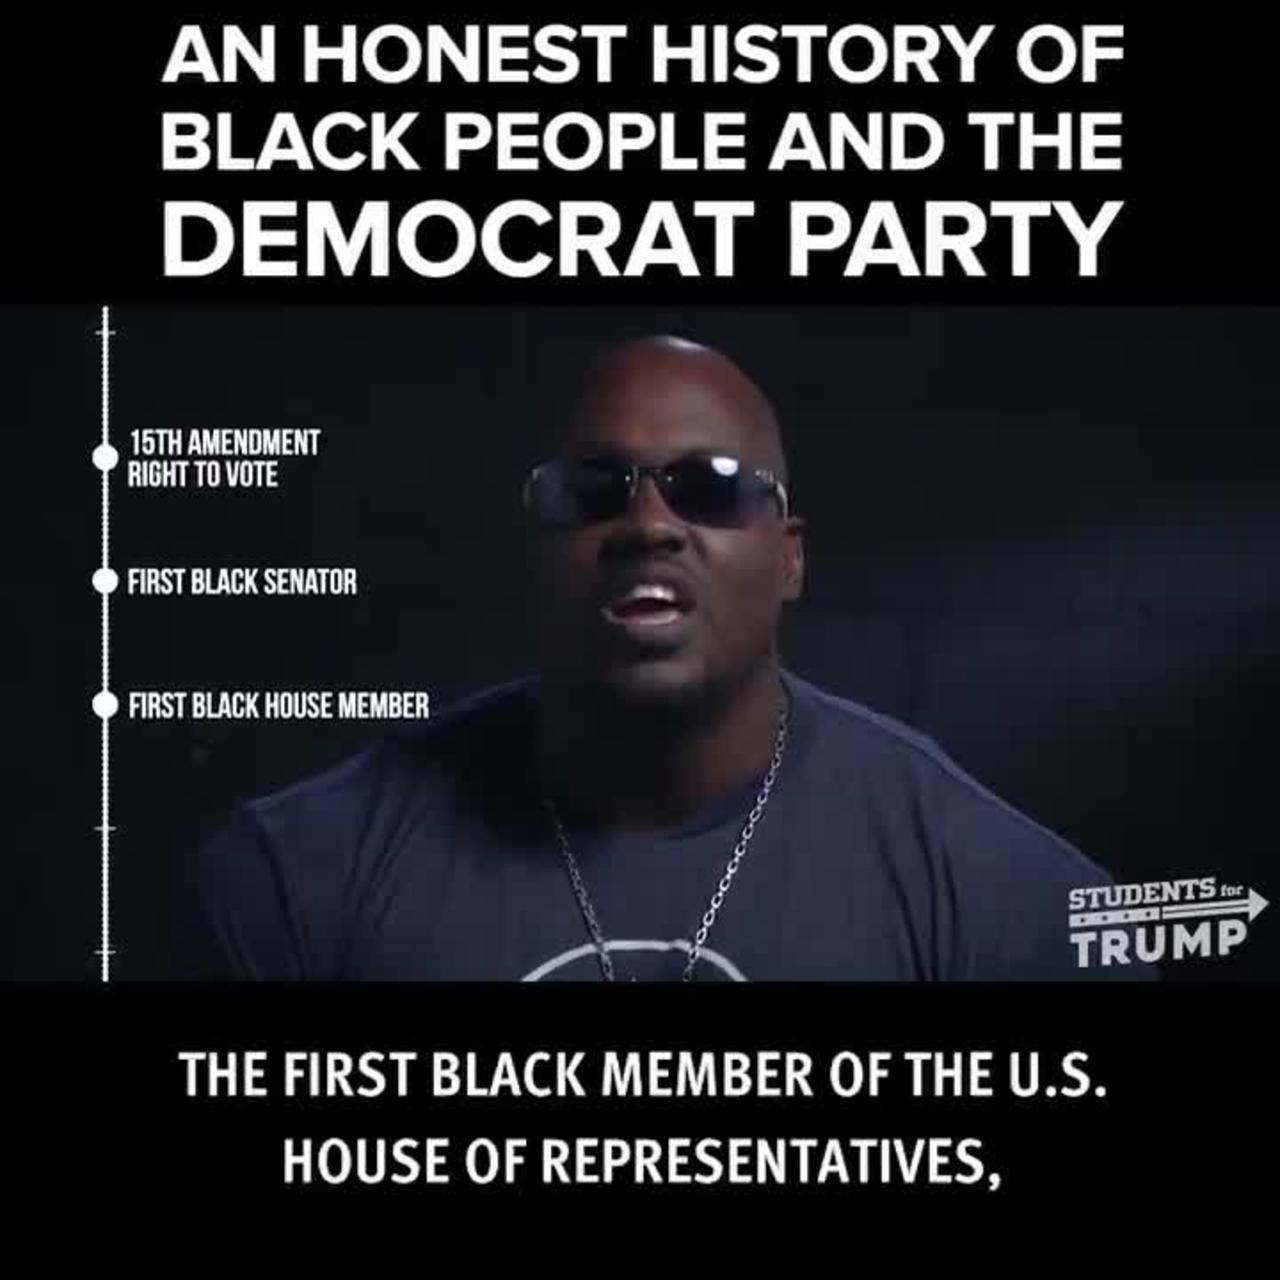 An Honest History of Black People and the Democratic Party